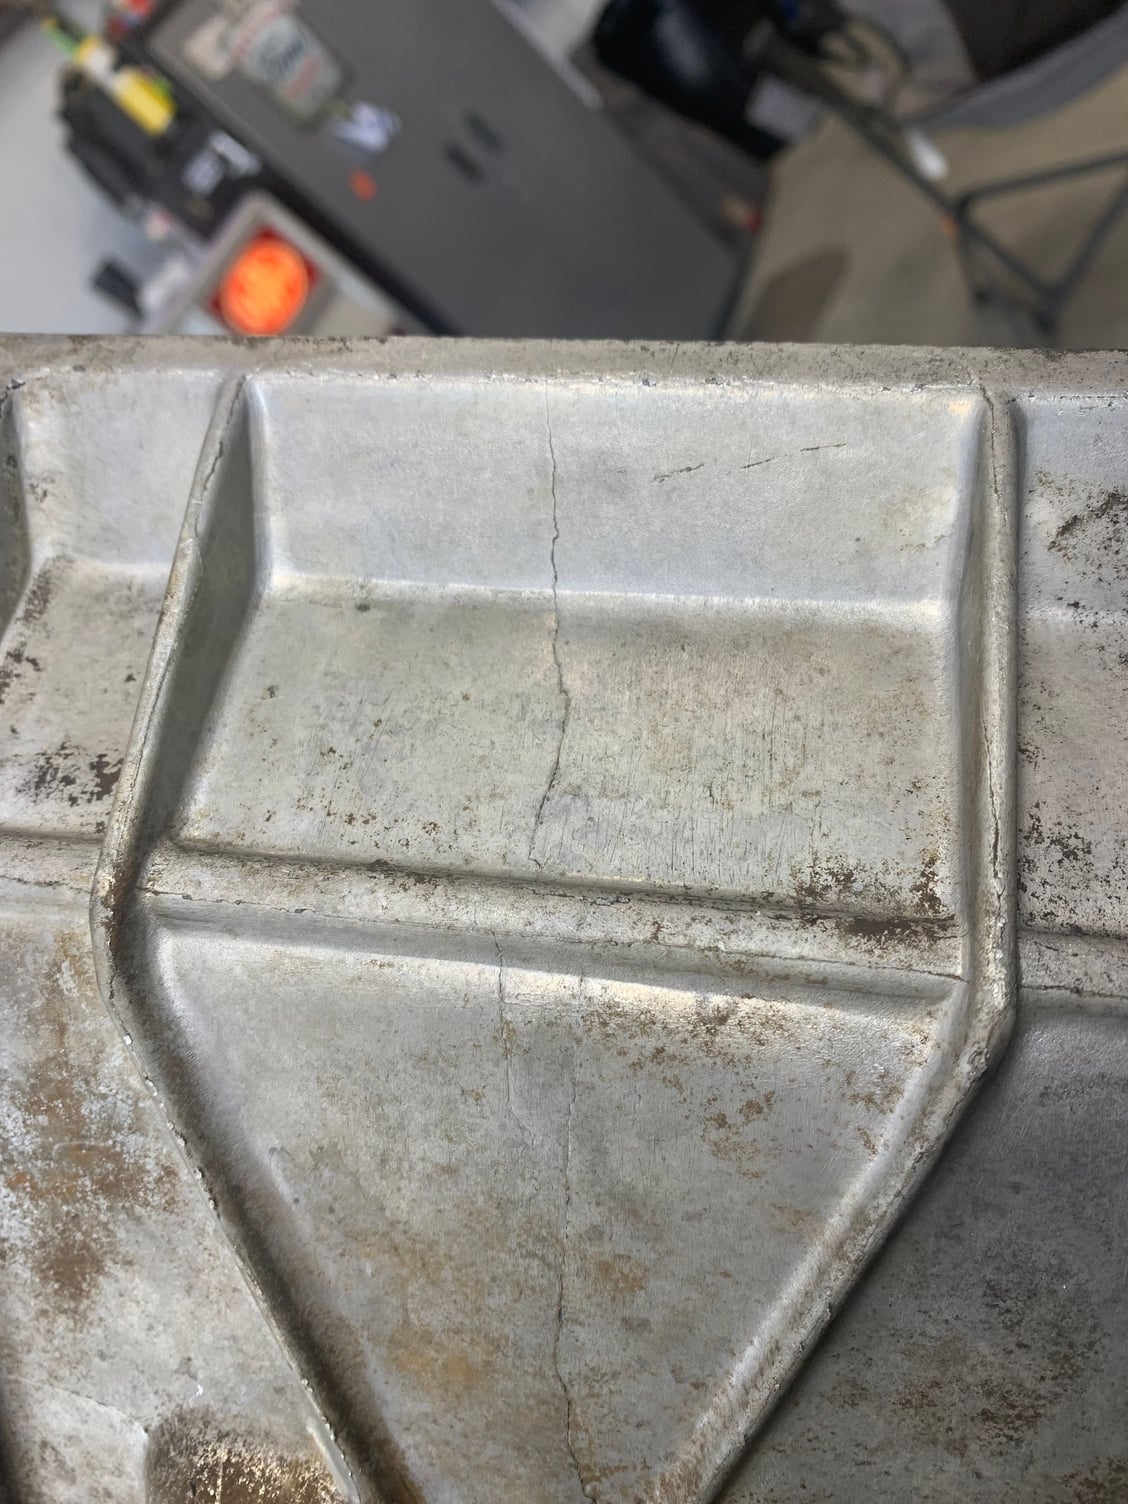 ZF5 casing crack Junk or fix? - Ford Truck Enthusiasts Forums